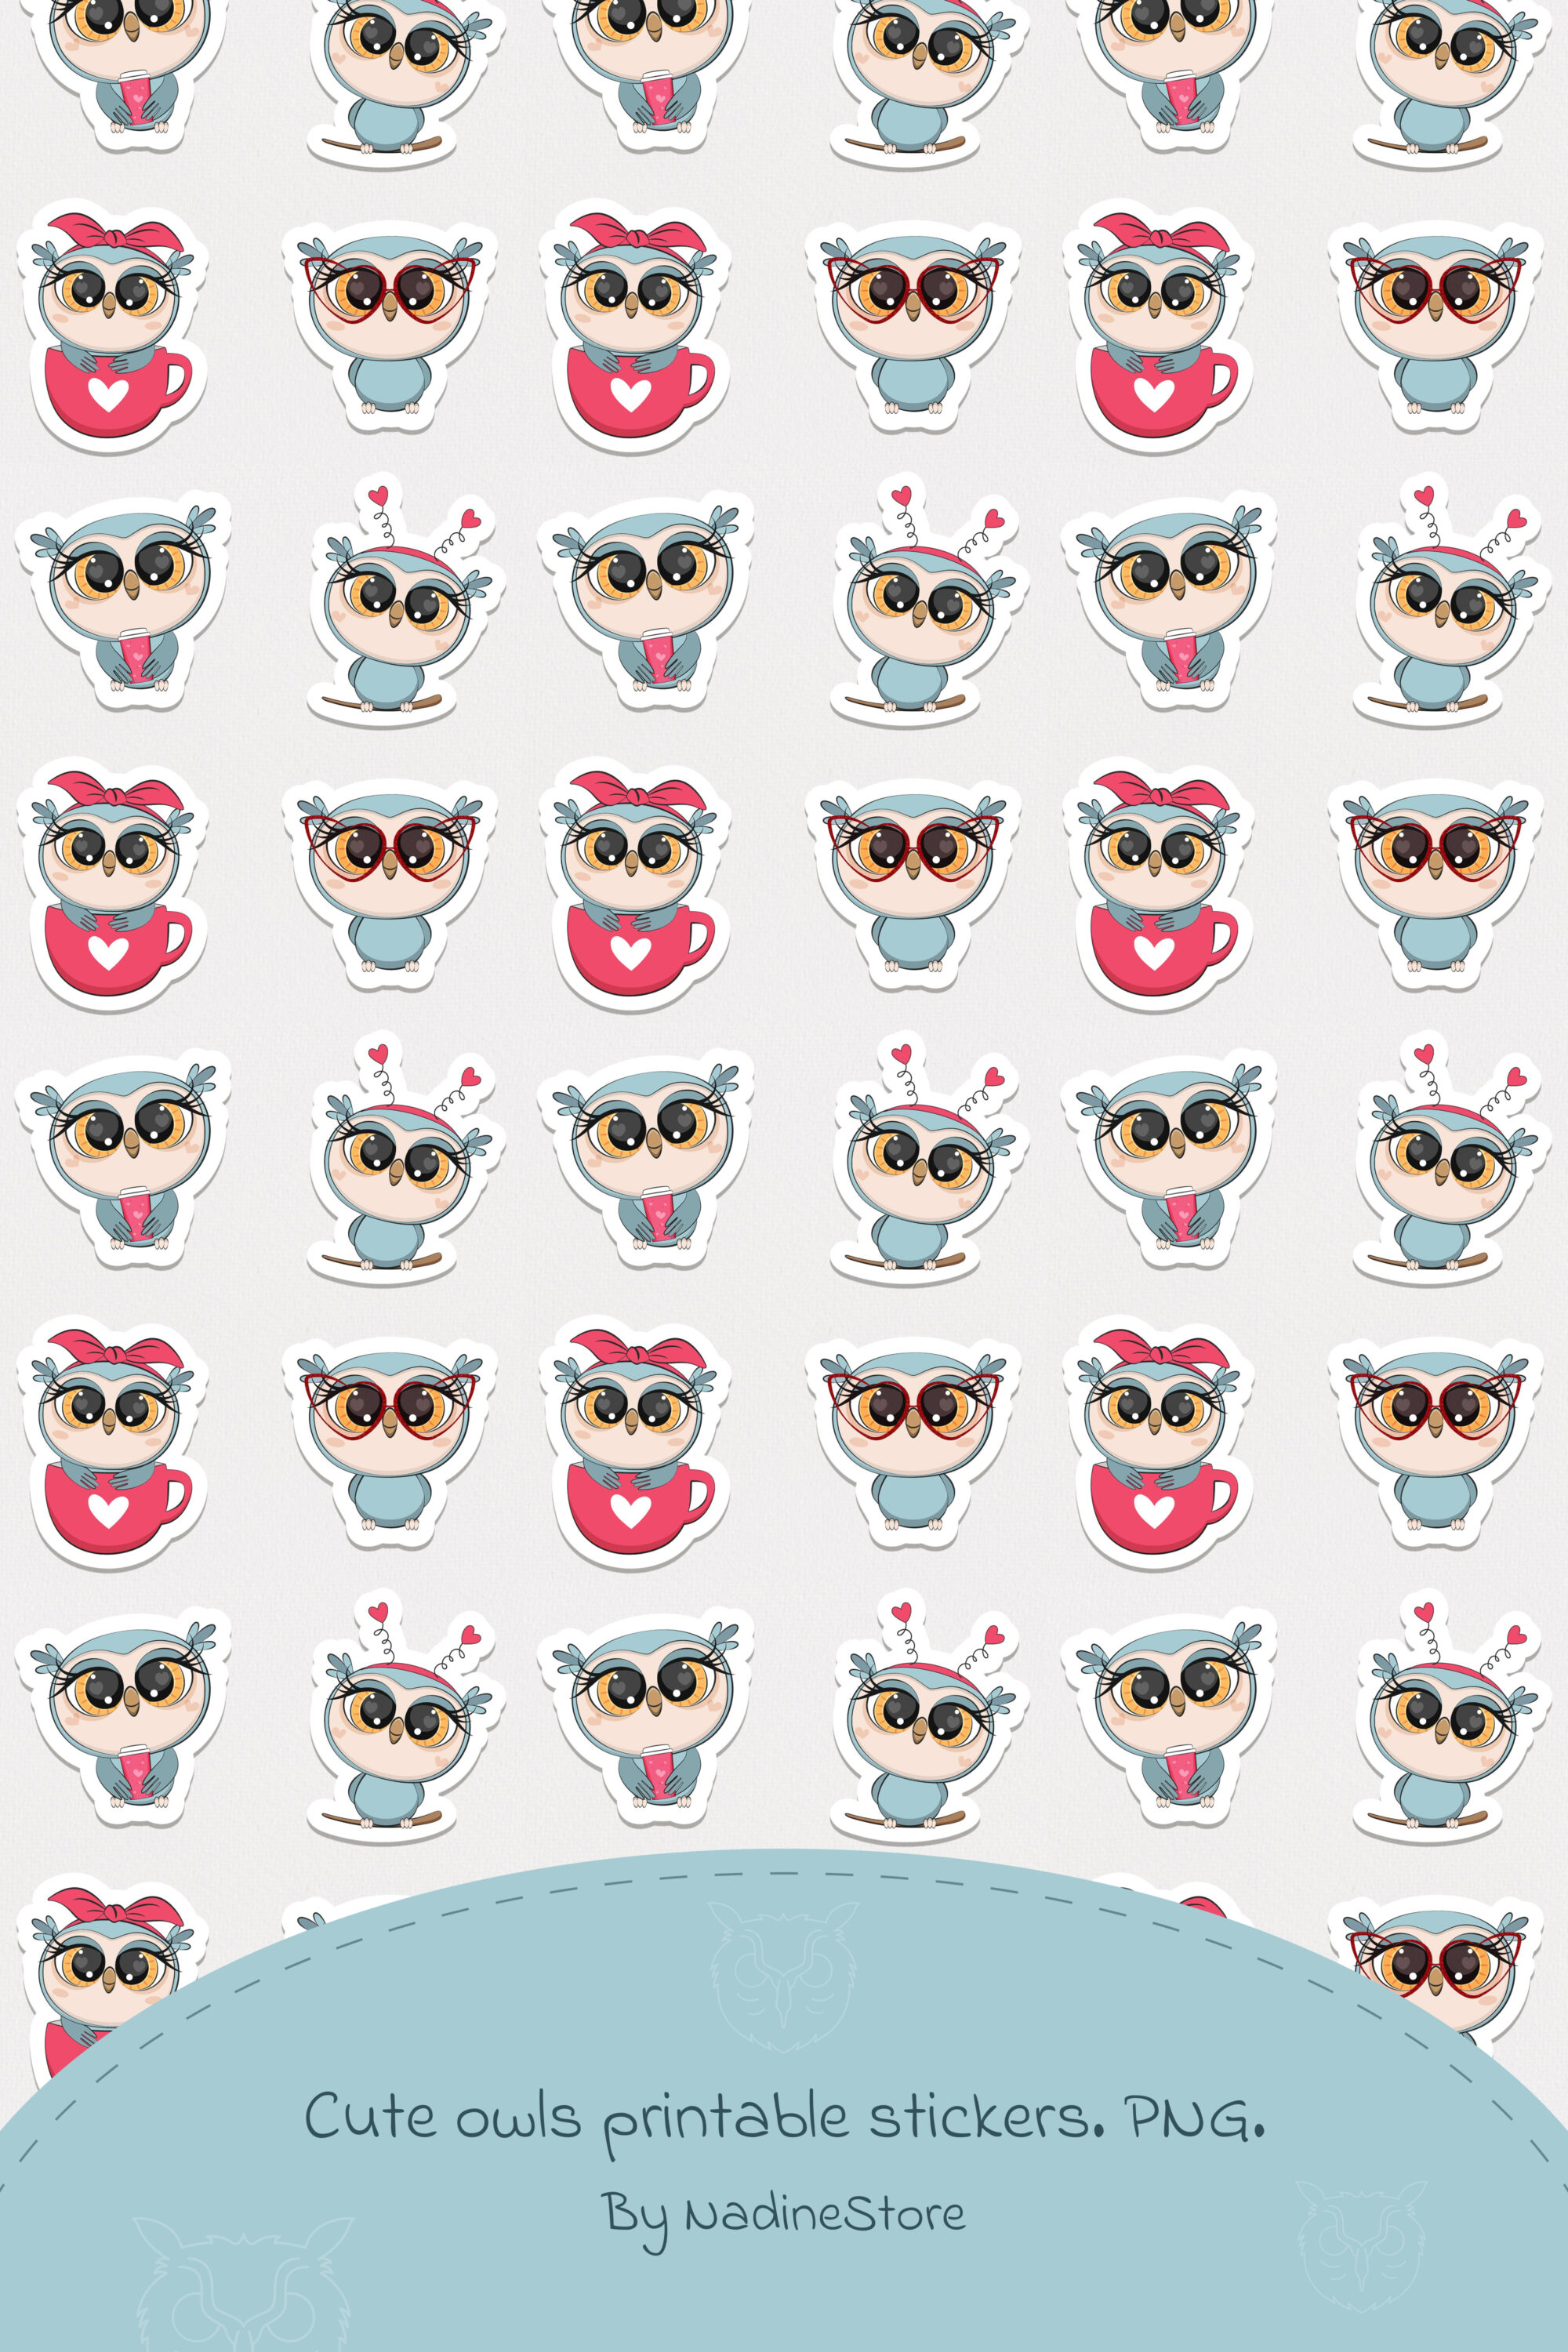 Cute owls printable stickers of pinterest.